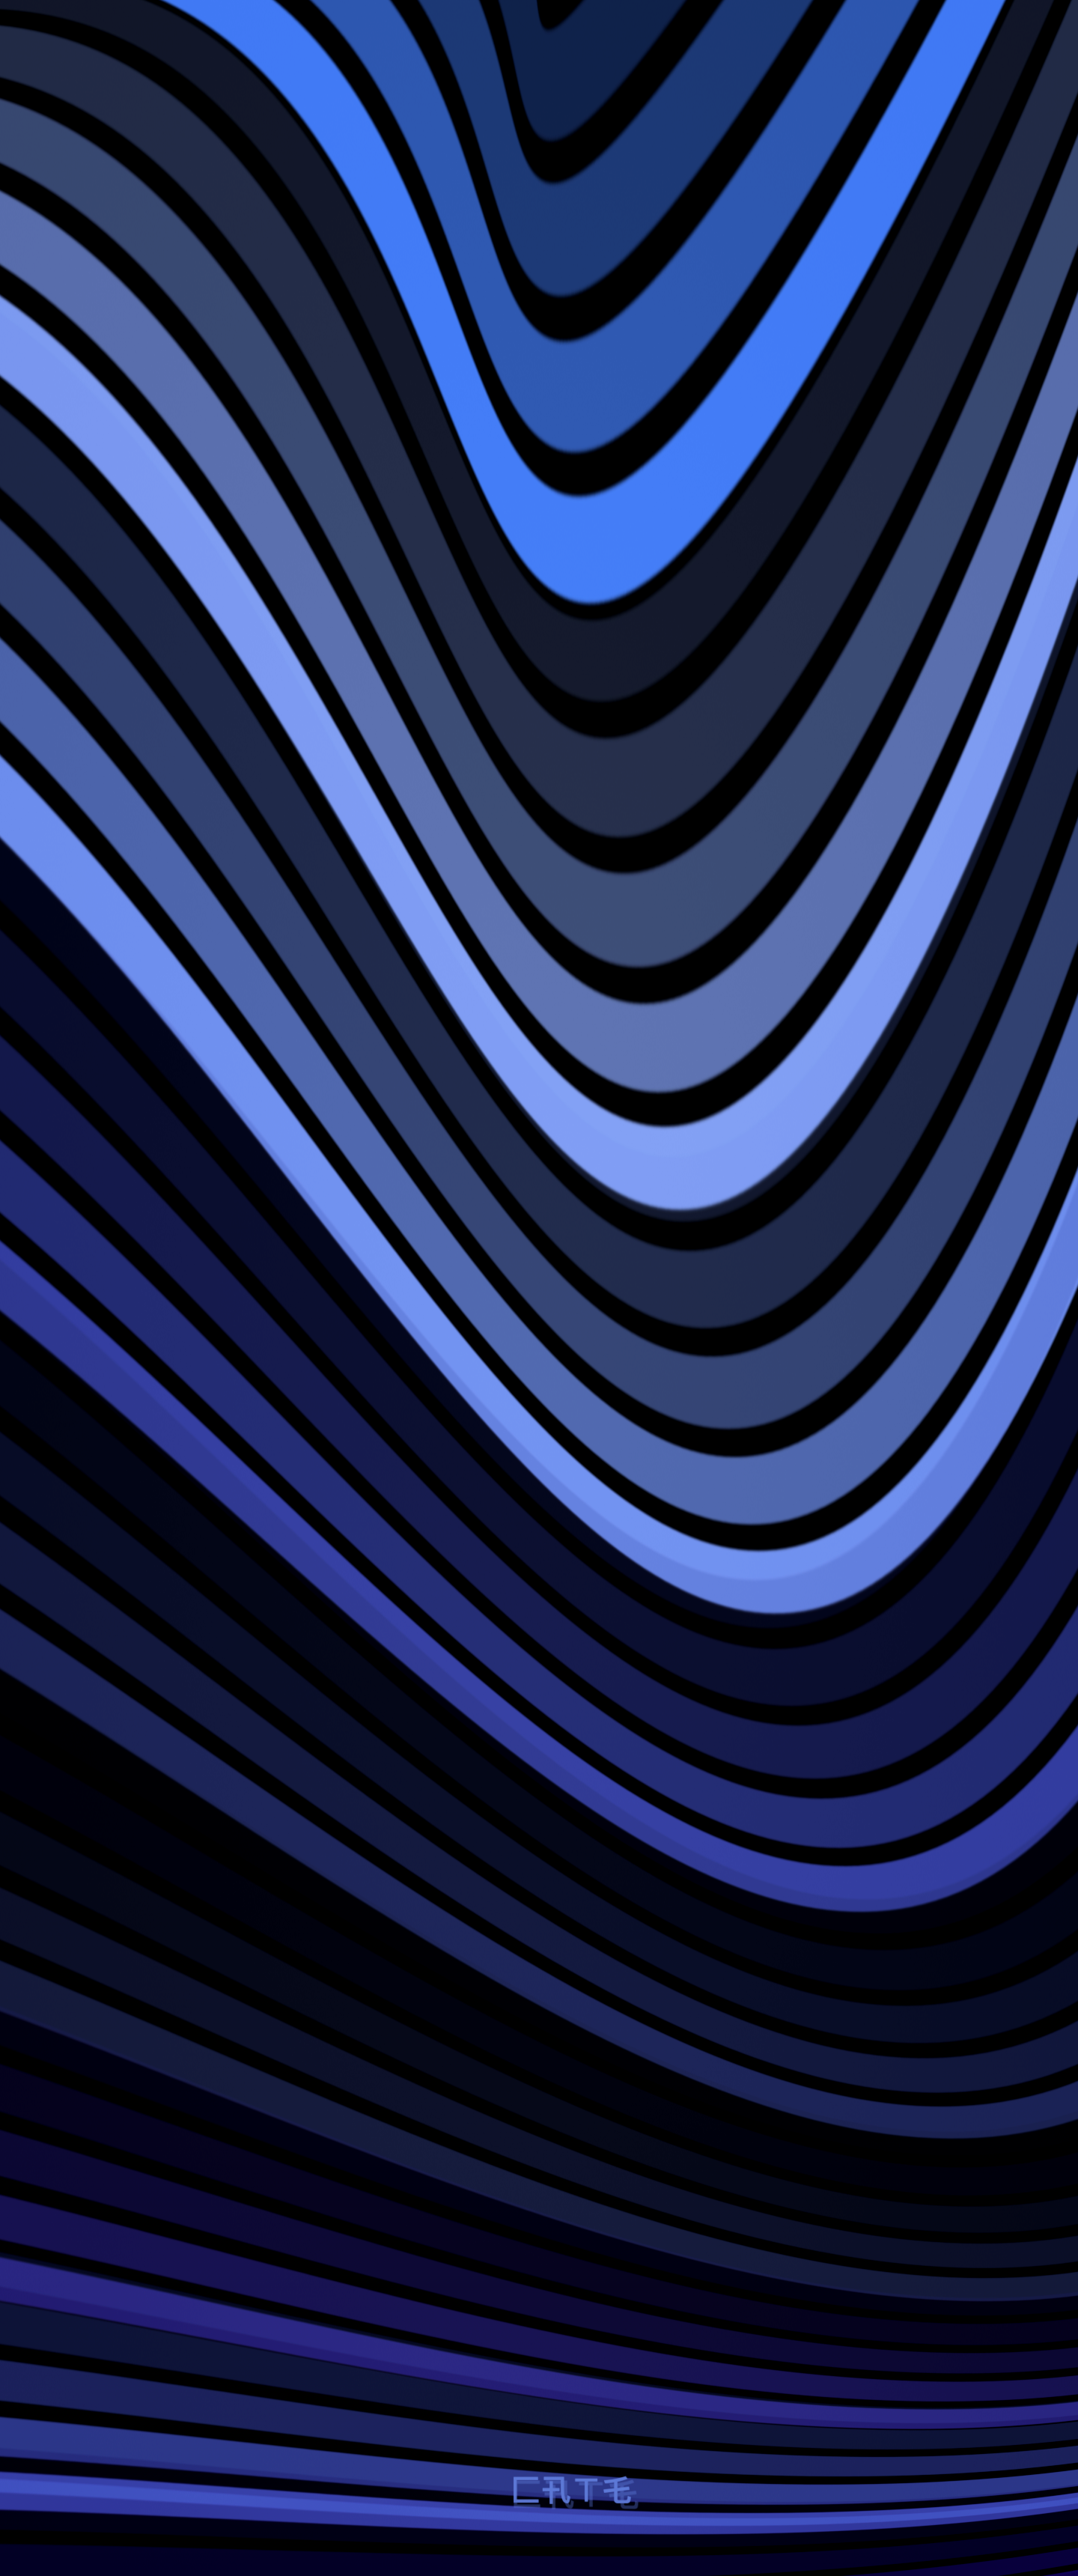 Striped Iphone Wallpapers